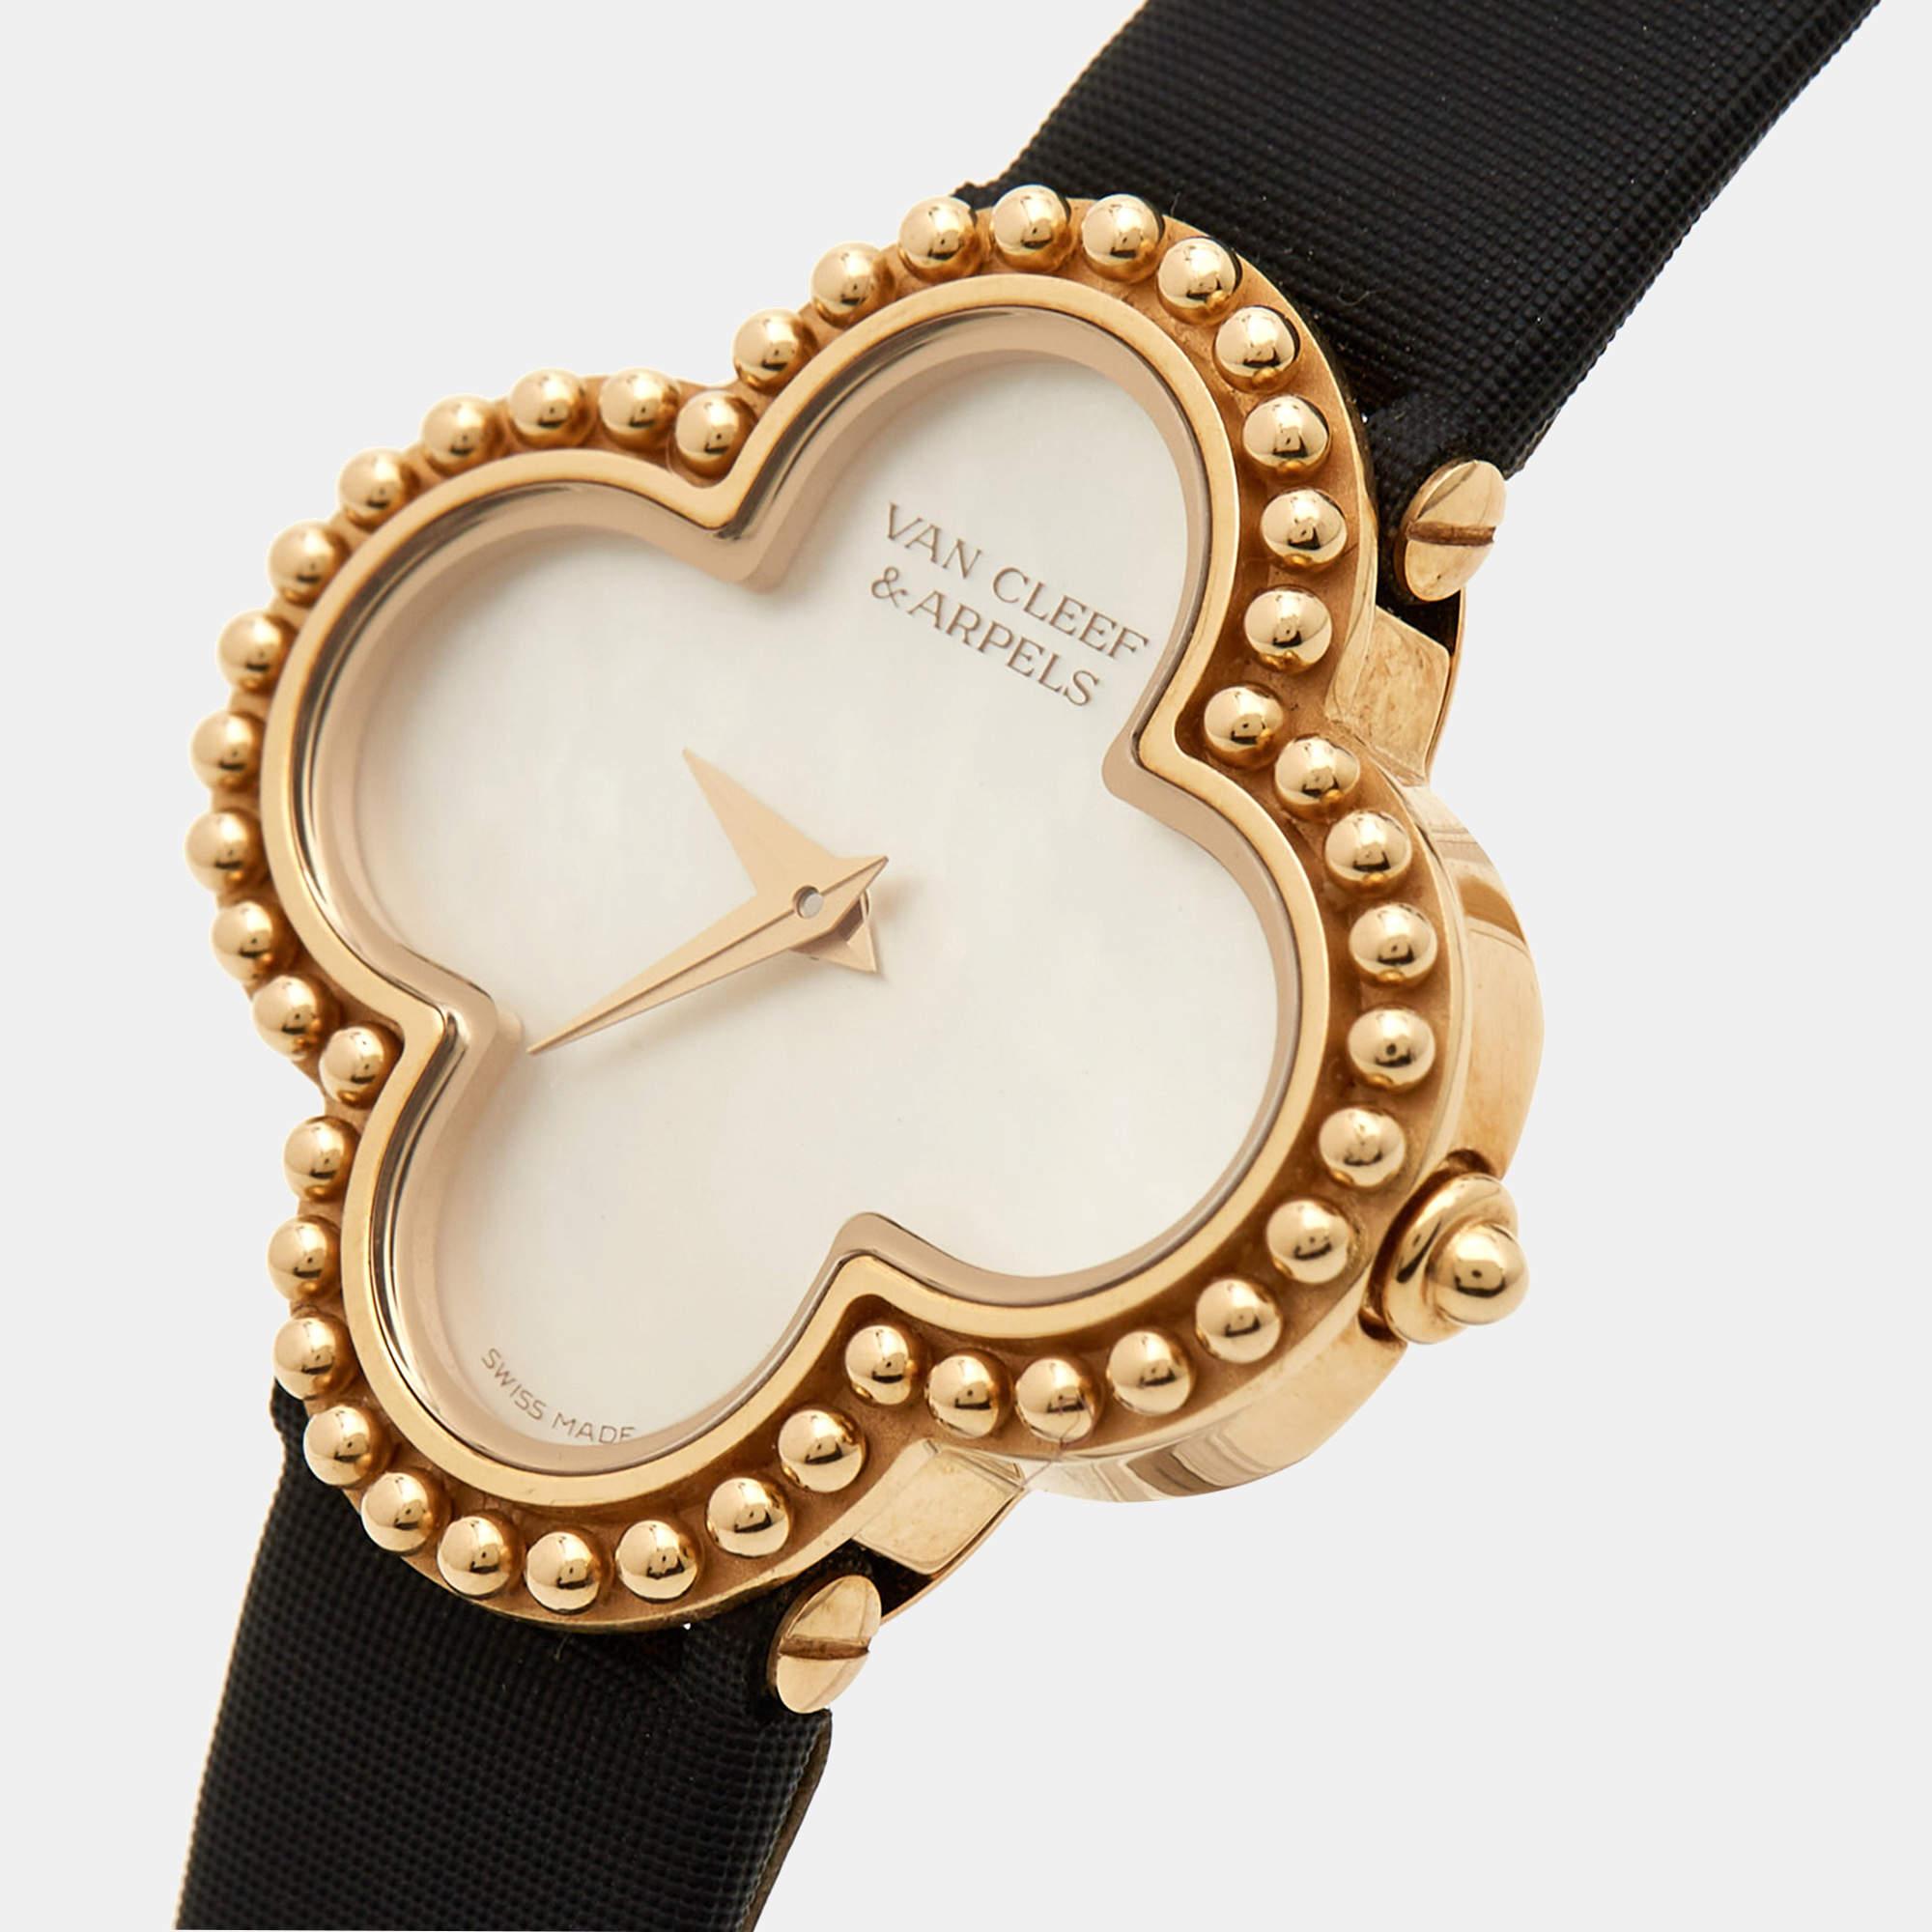 A timeless silhouette made of high-quality materials and packed with precision and luxury makes this Van Cleef & Arpels Alhambra wristwatch the perfect choice for a sophisticated finish to any look. It is a grand creation to elevate the everyday